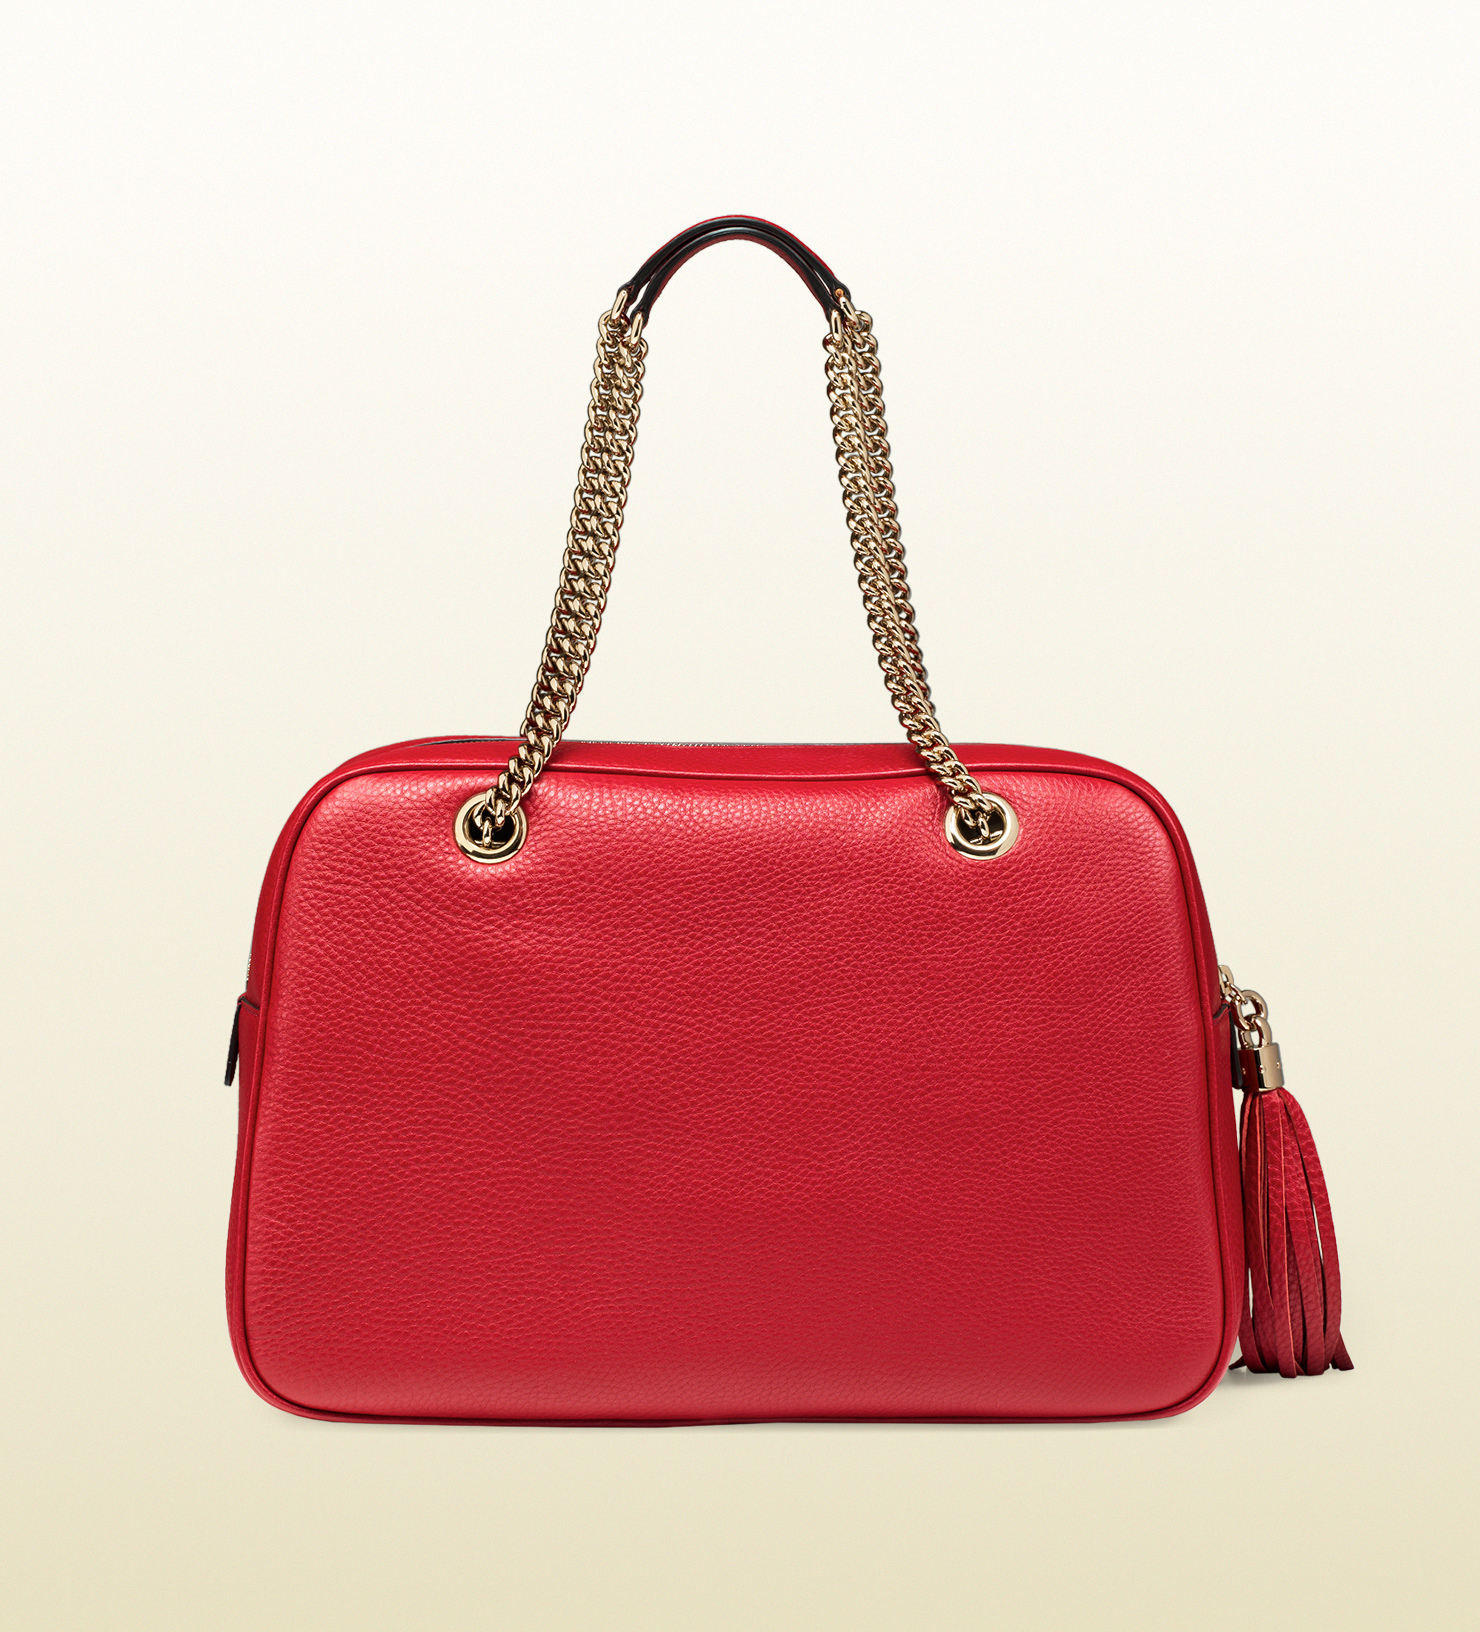 Lyst - Gucci Soho Leather Chain Shoulder Bag in Red